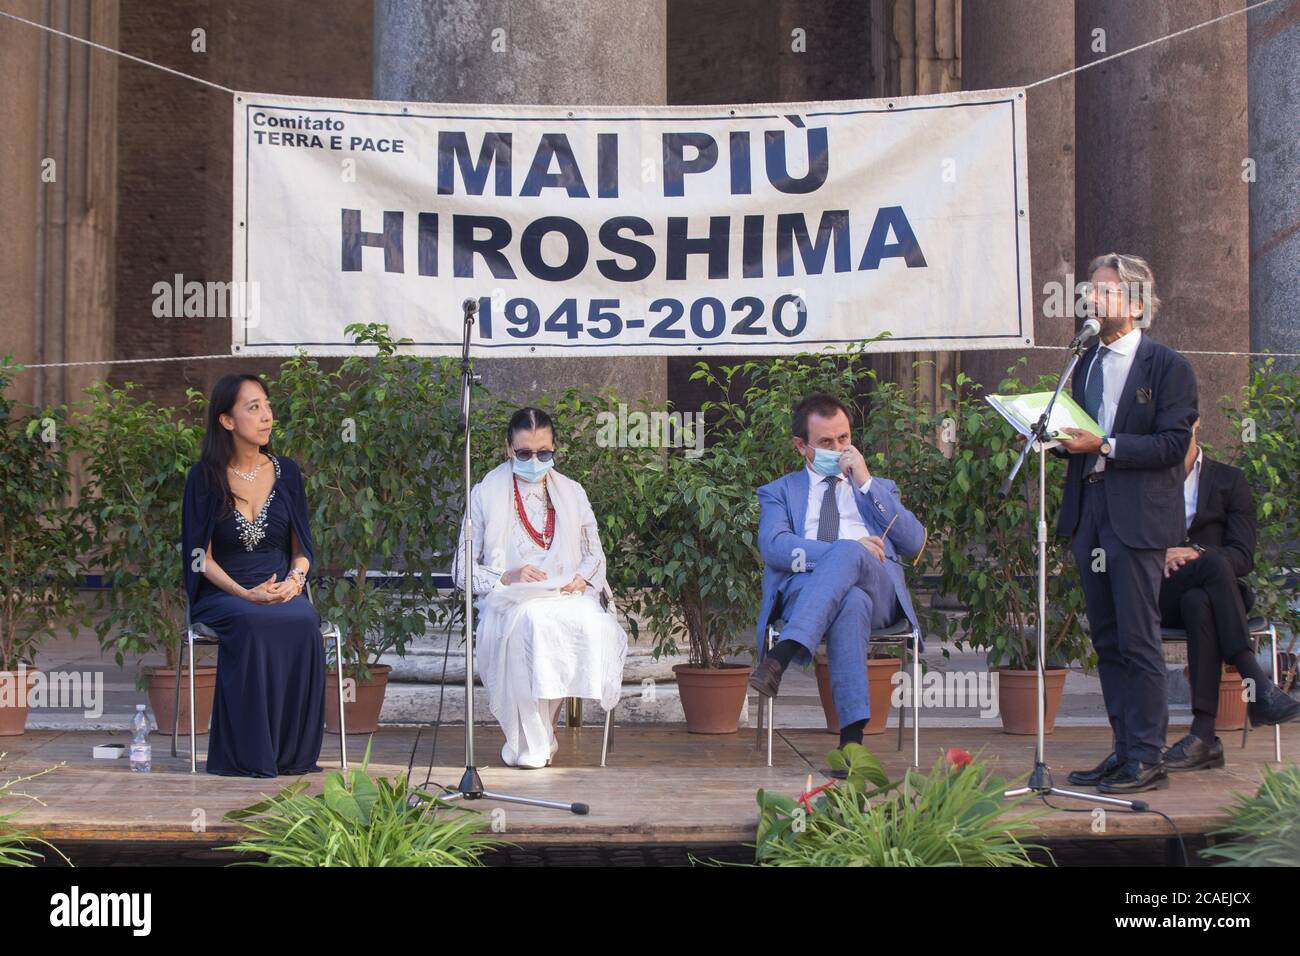 Roma, Italy. 06th Aug, 2020. Ceremony in front of the Pantheon in Rome to celebrate the 75th anniversary of the launch of the nuclear bomb on the Japanese city of Hiroshima. (Photo by Matteo Nardone/Pacific Press) Credit: Pacific Press Media Production Corp./Alamy Live News Stock Photo